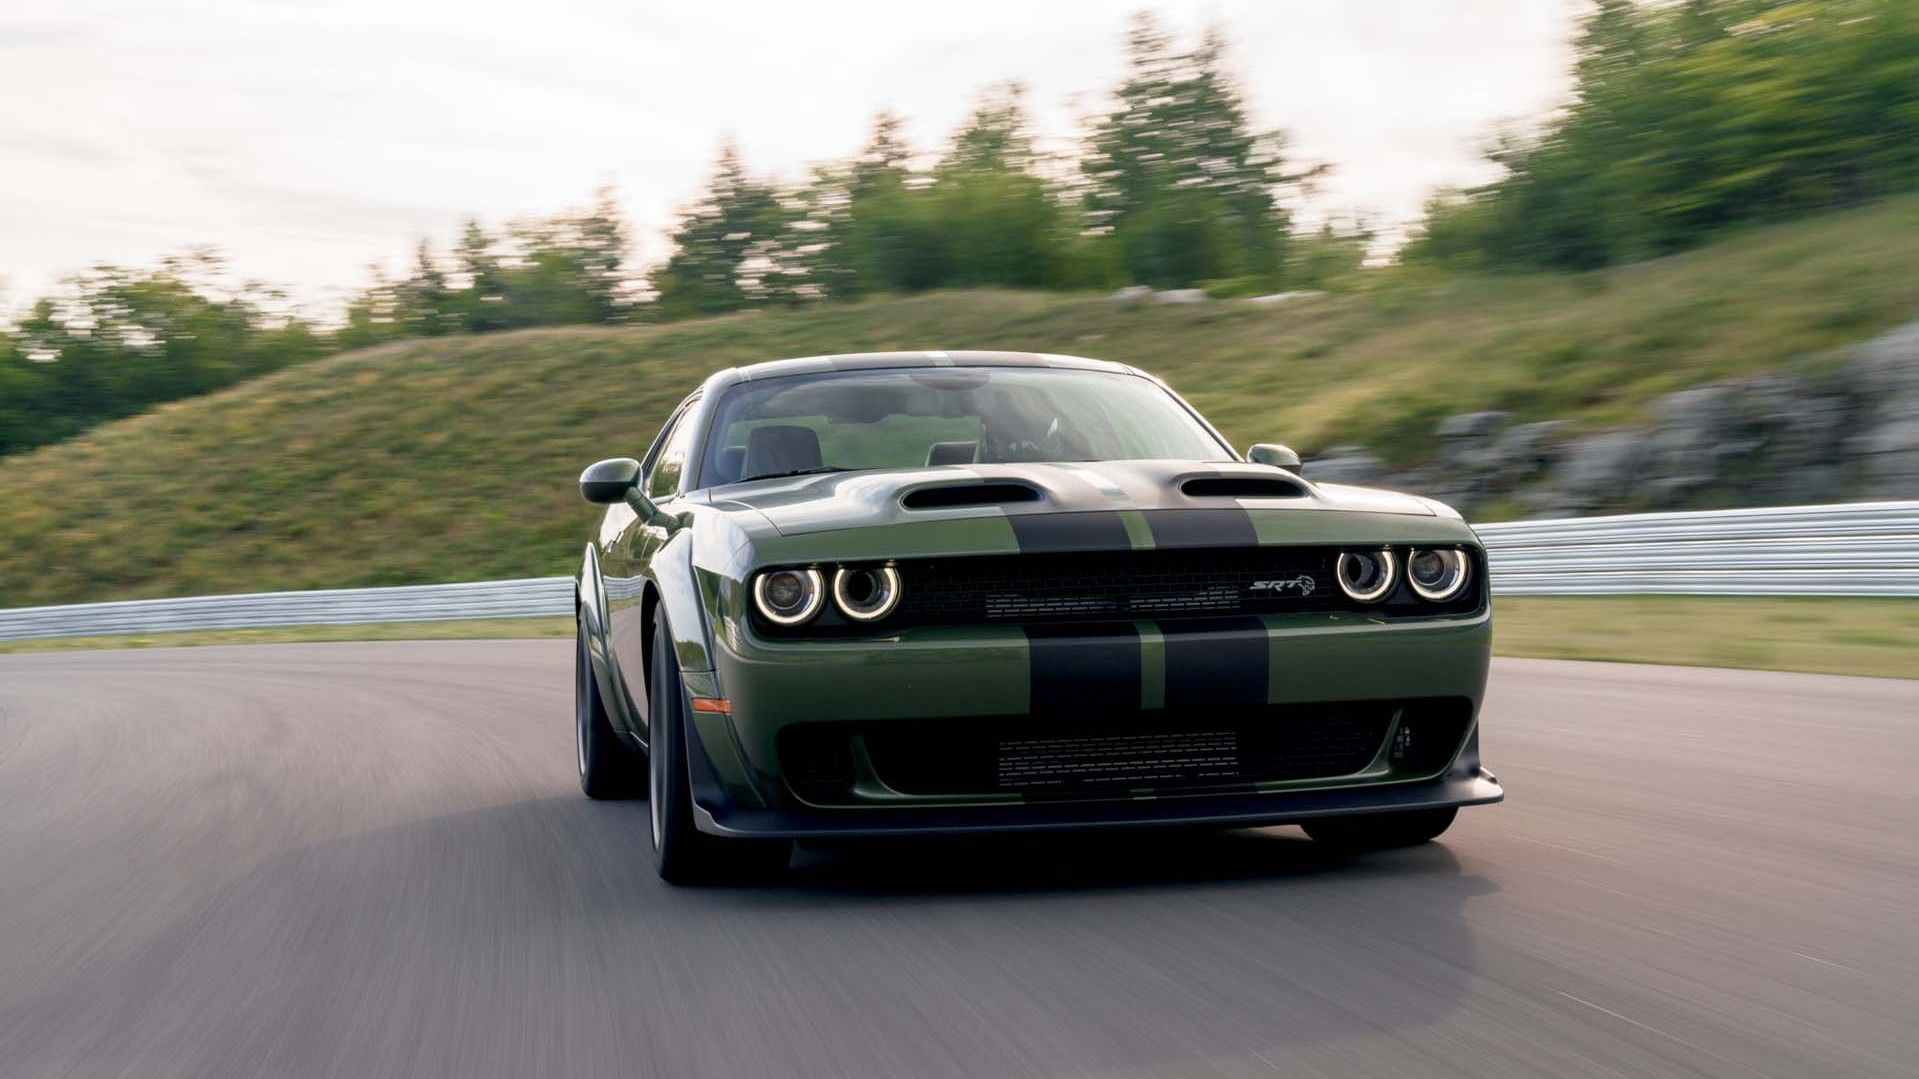 2020 Dodge Challenger preview